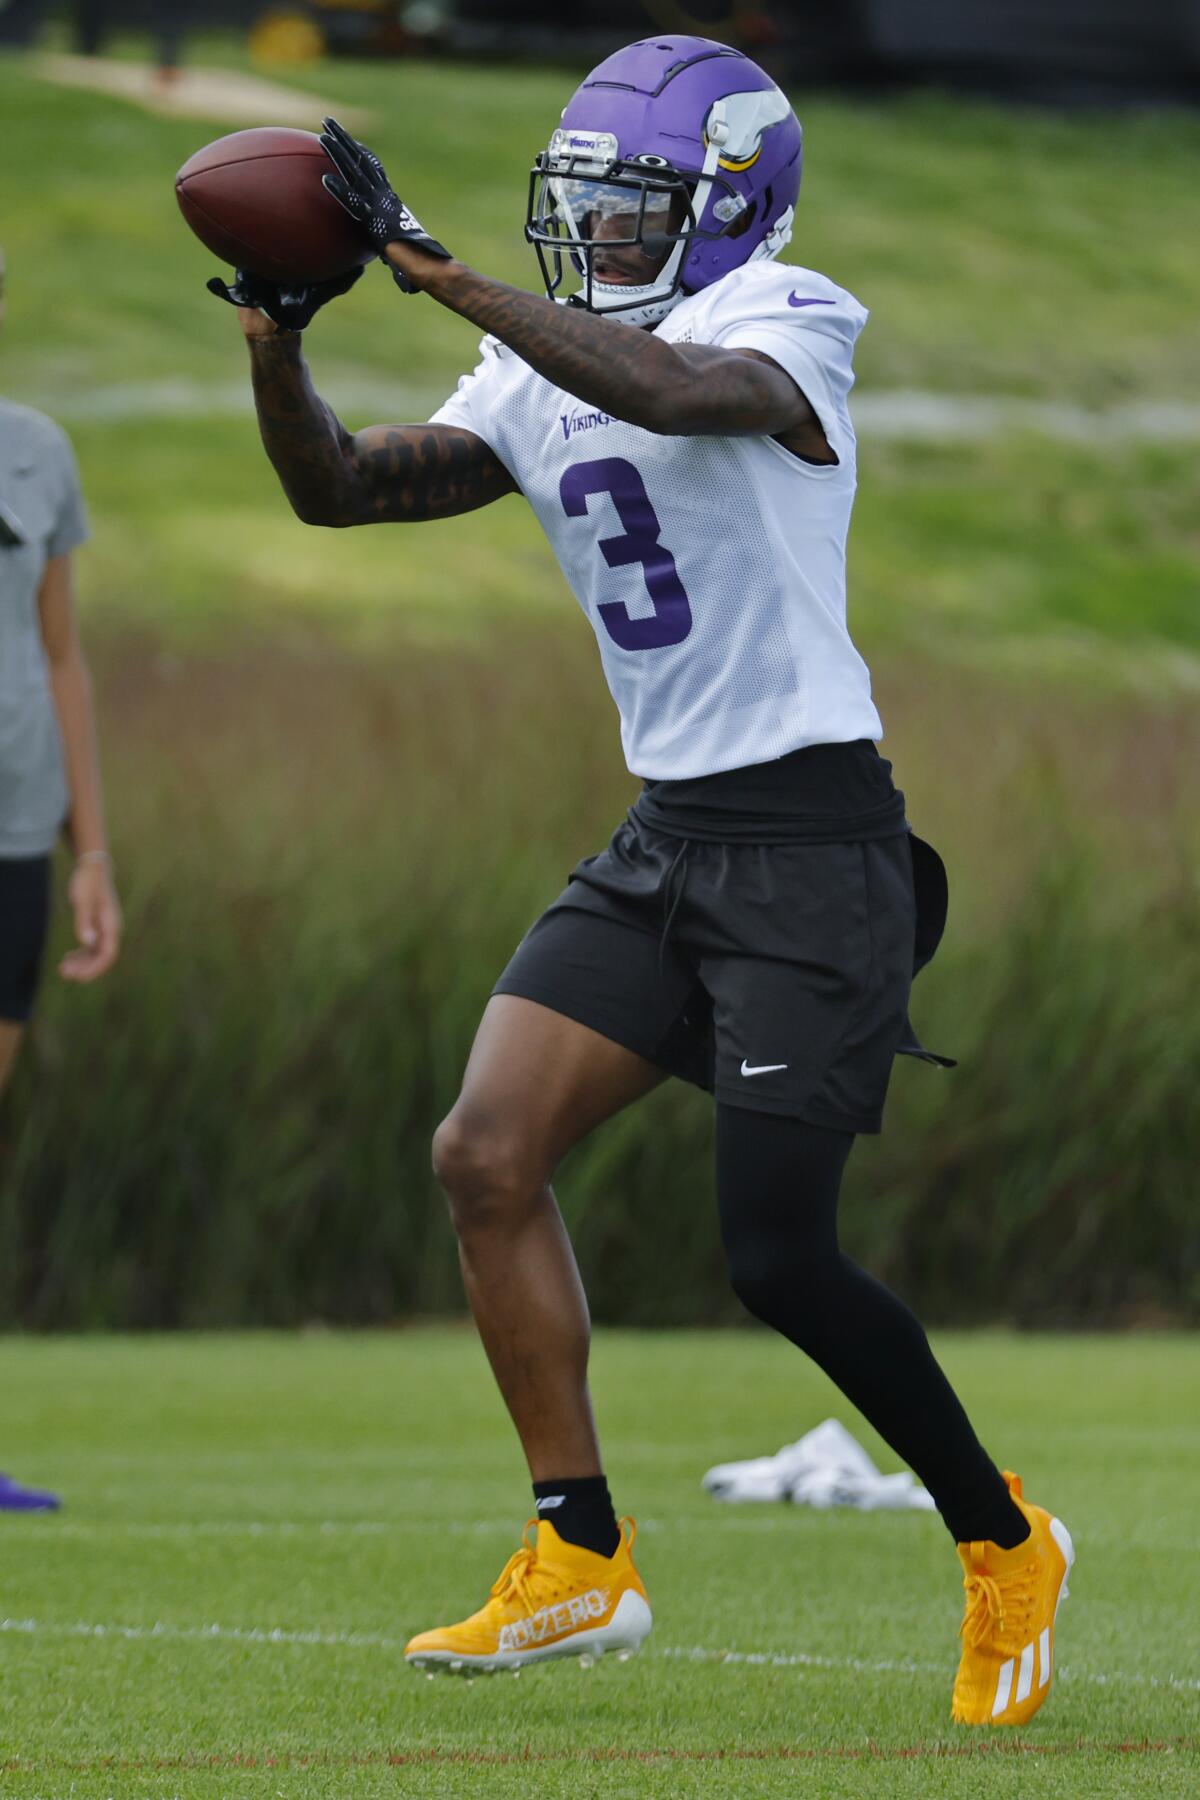 Vikings rookie Jordan Addison is turning heads in training camp after rocky  off-the-field start - The San Diego Union-Tribune